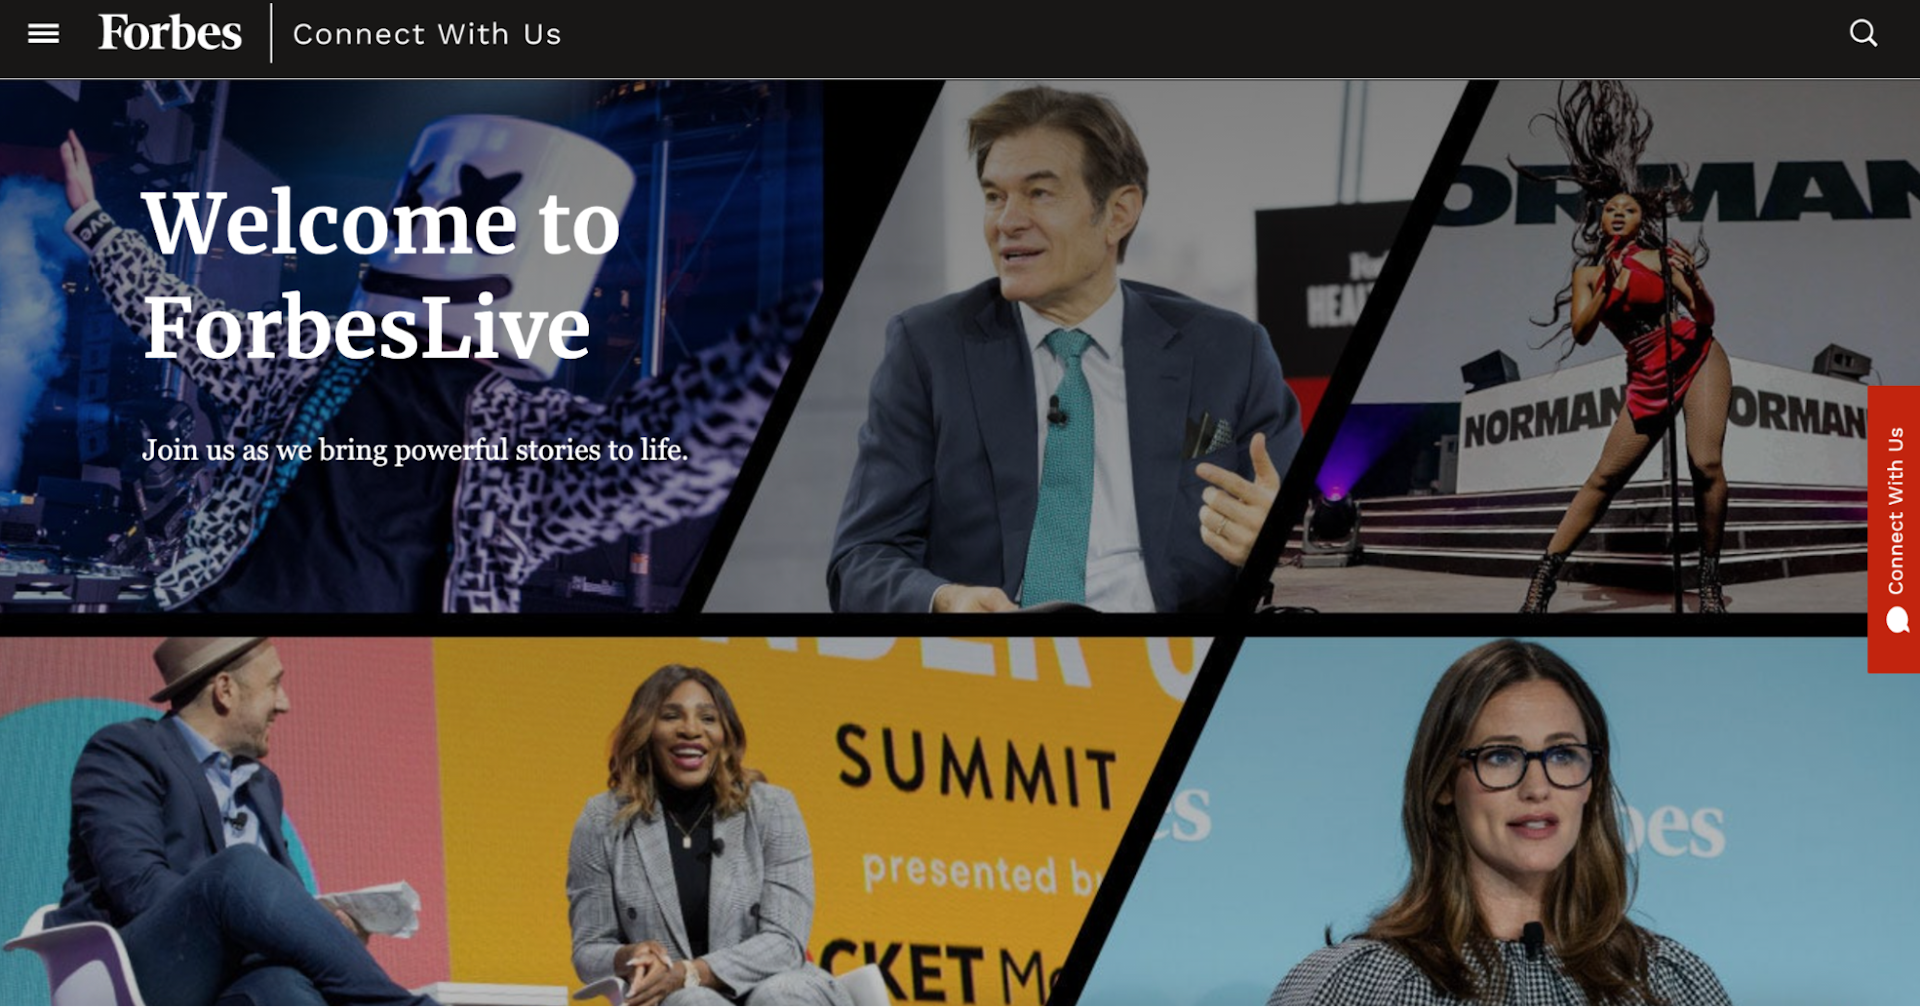 Information landing page for all Forbes Events